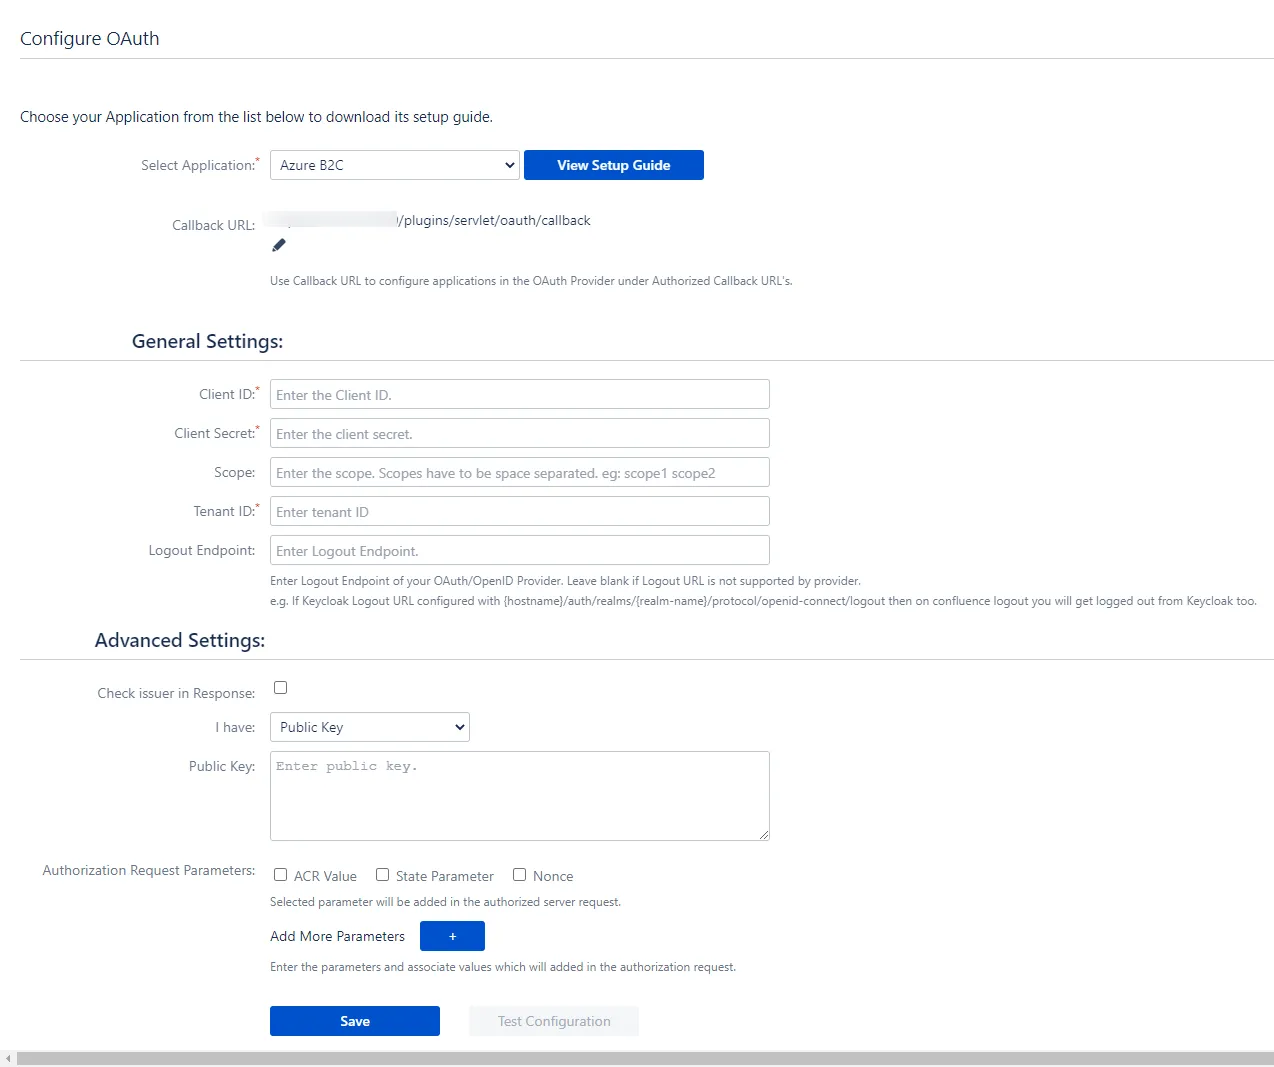 Confluence OAuth / OPenID Single Sign On (SSO) using Azure B2C, Configuration